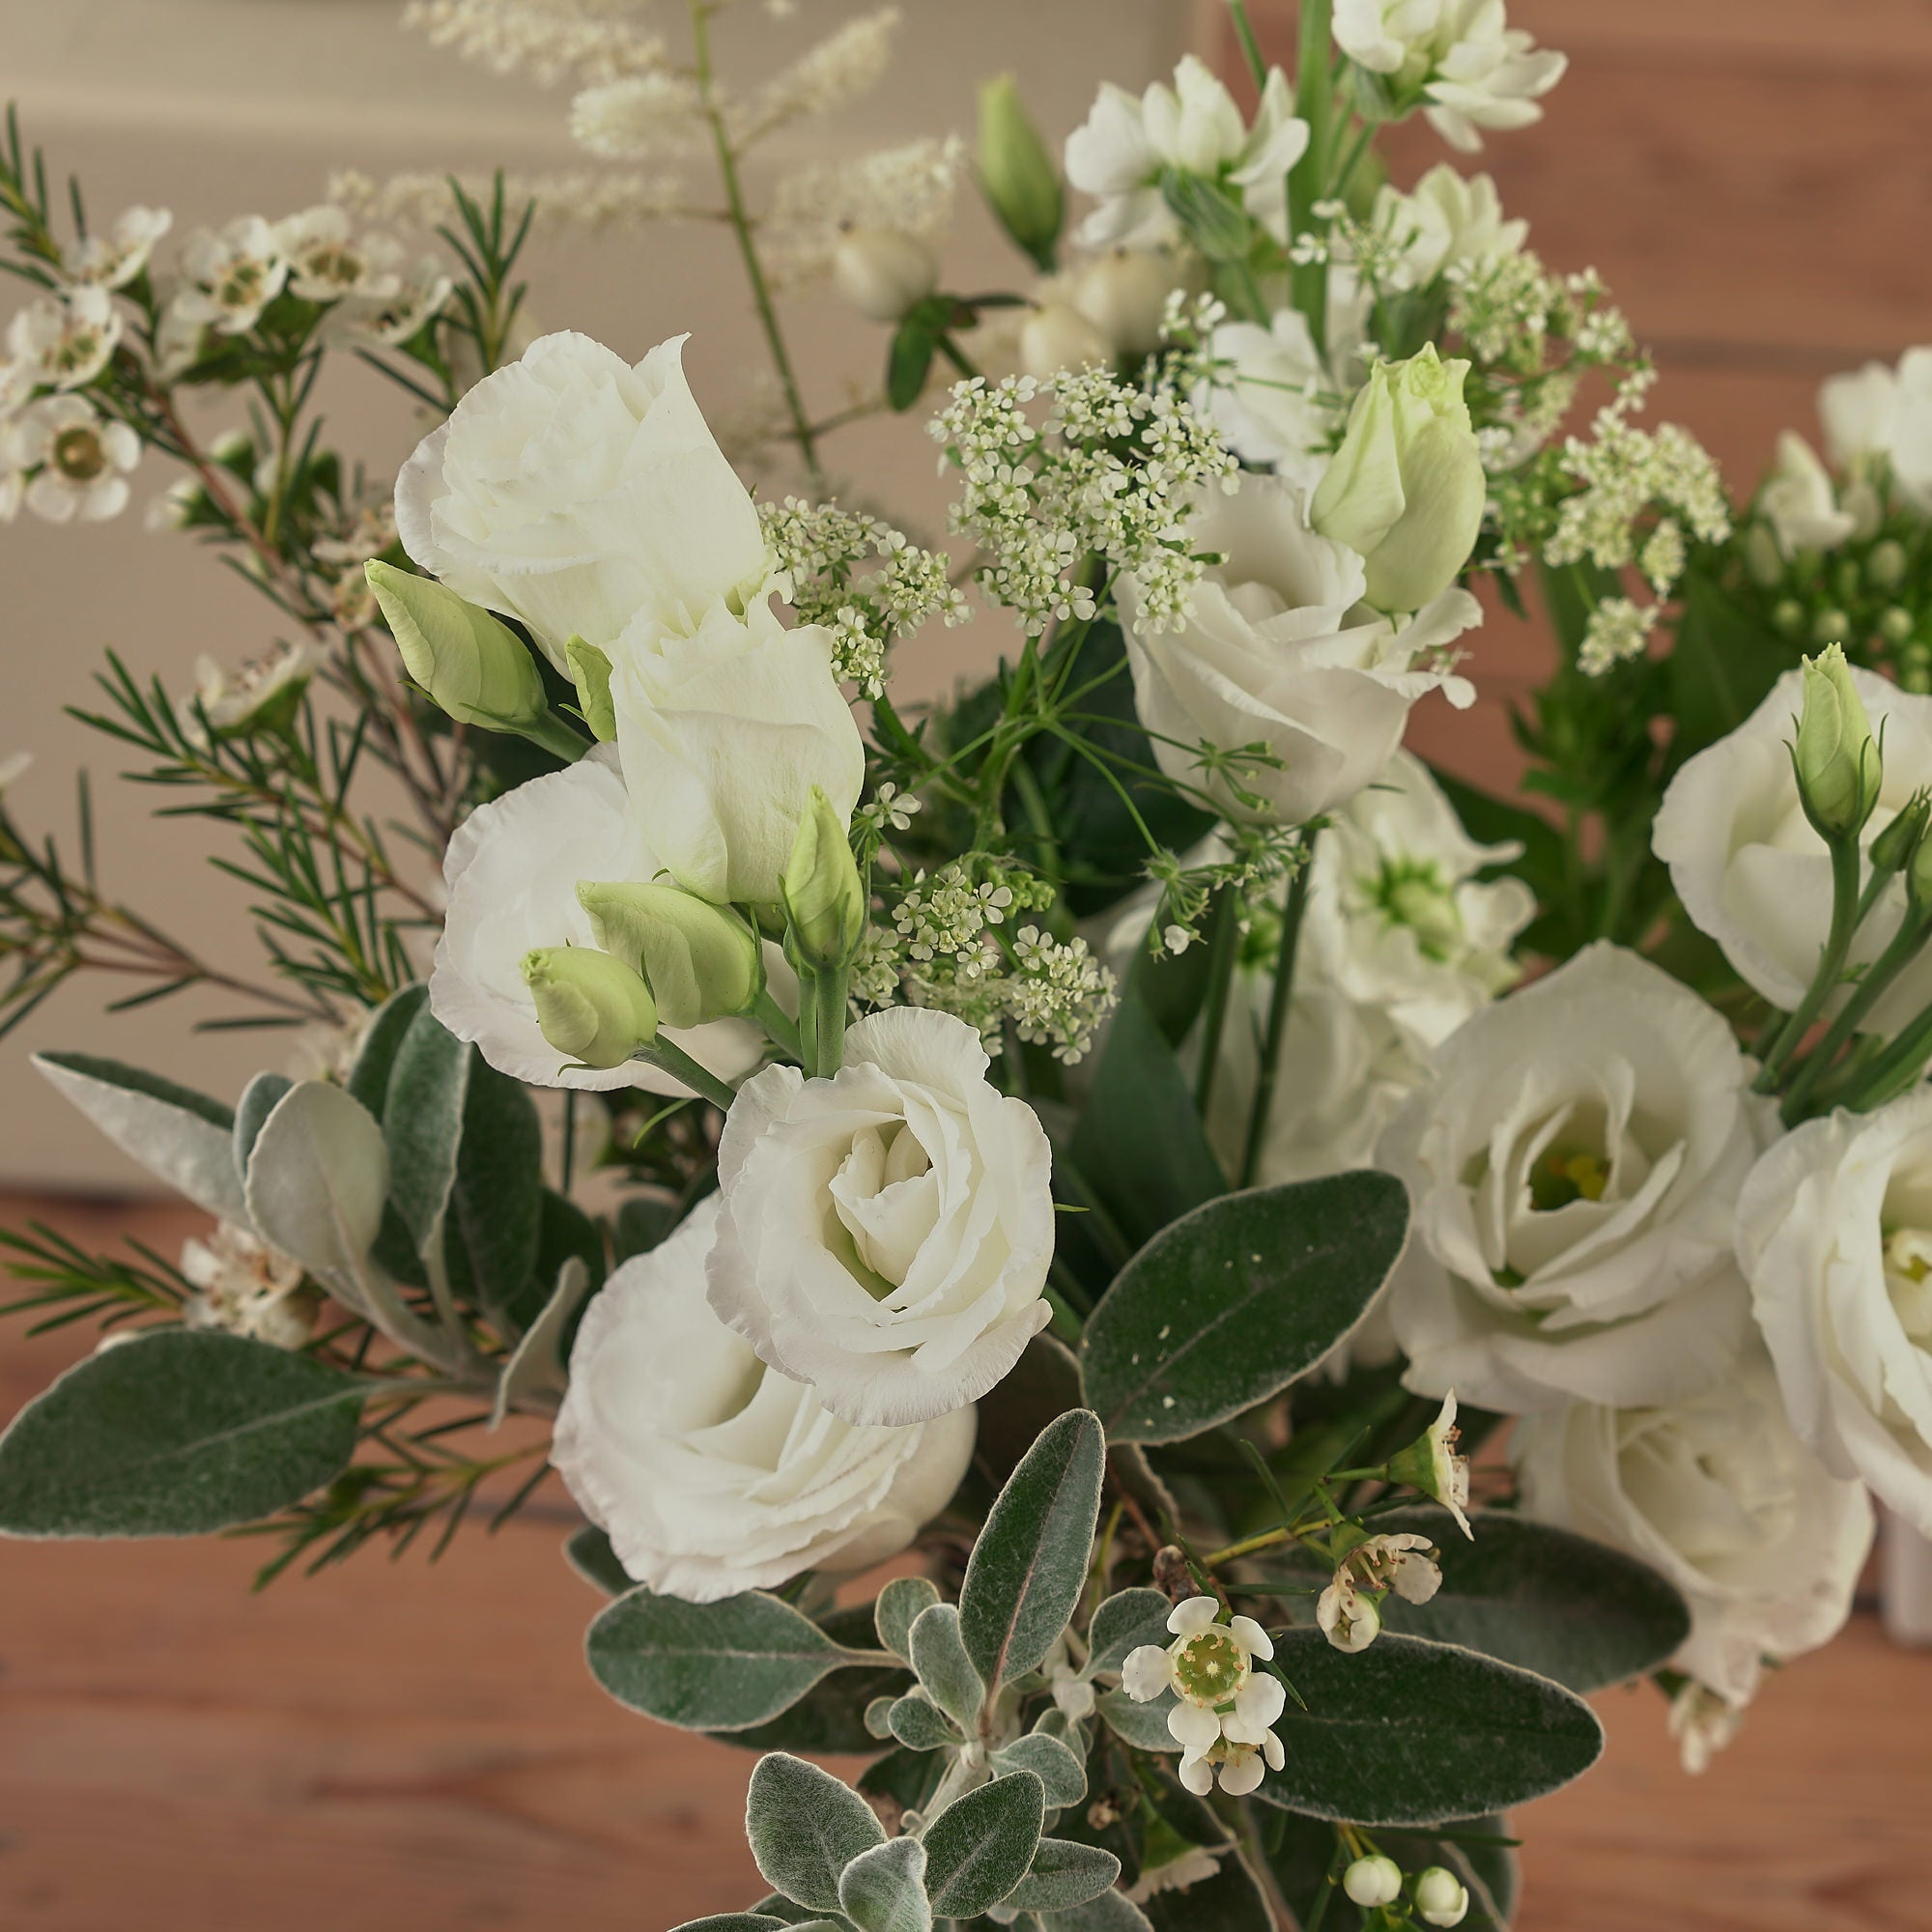 classic white table arrangements for weddings and events by Botanique Workshop London